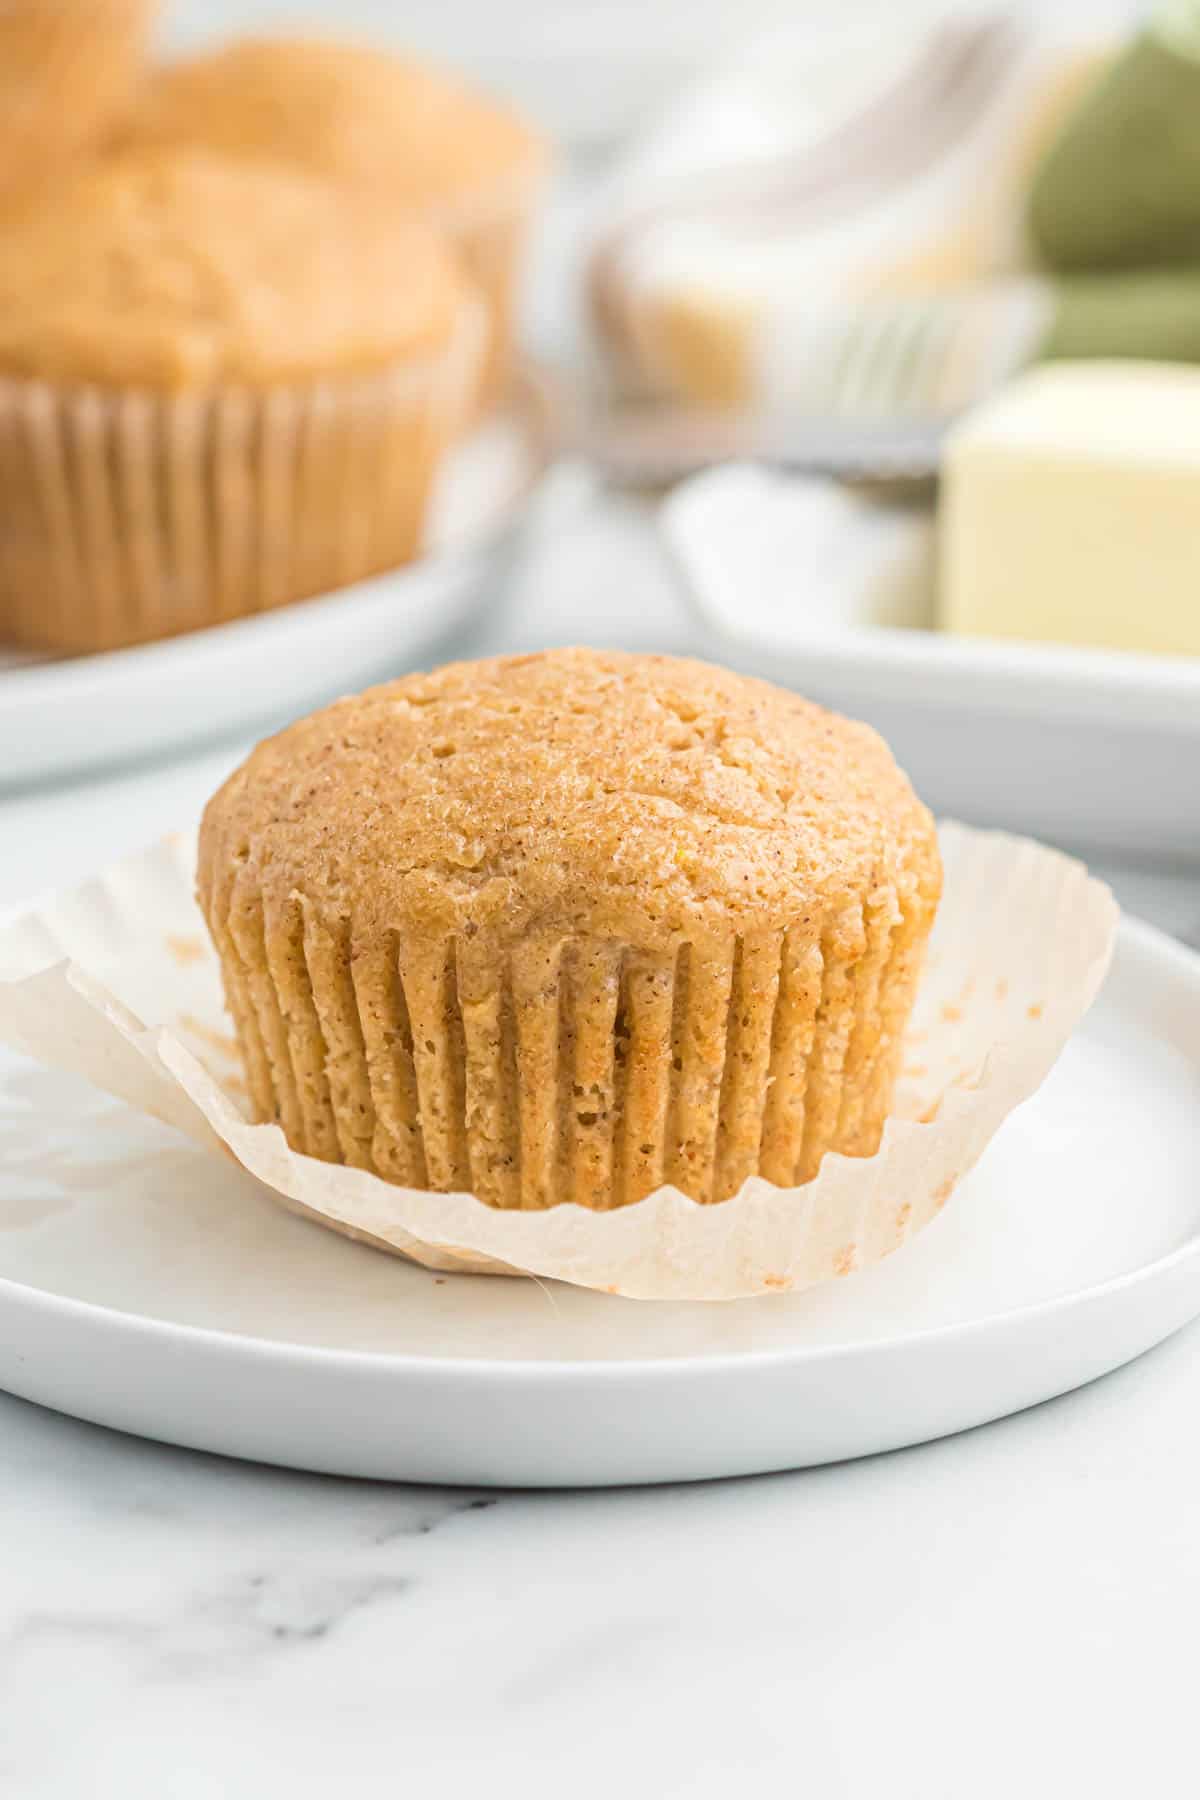 applesauce muffin on a plate